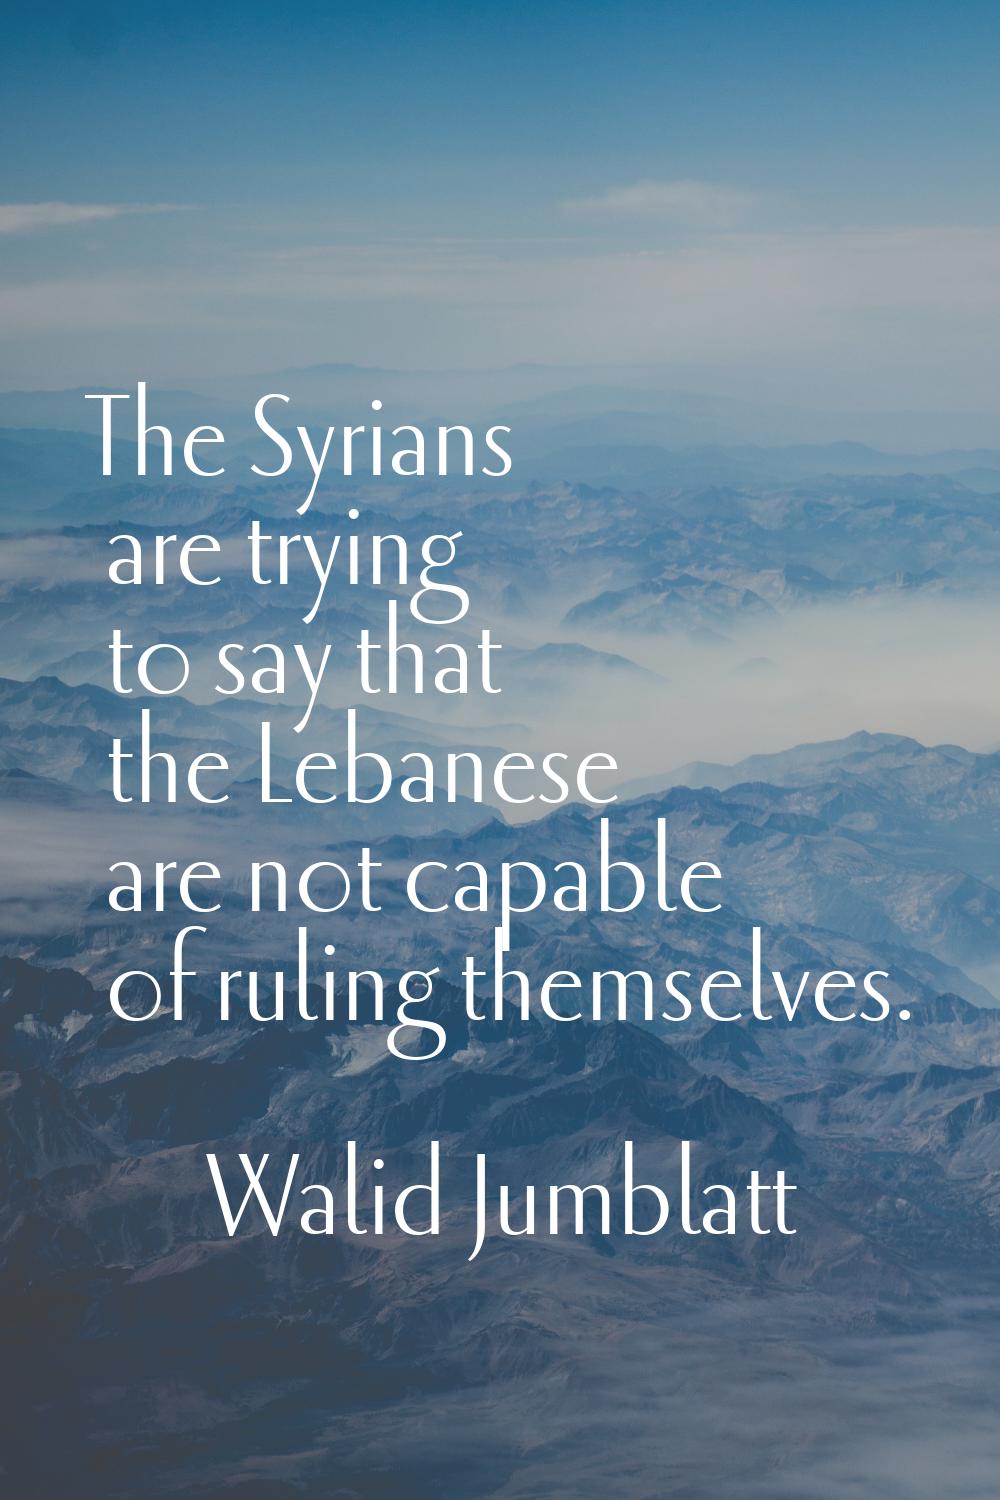 The Syrians are trying to say that the Lebanese are not capable of ruling themselves.